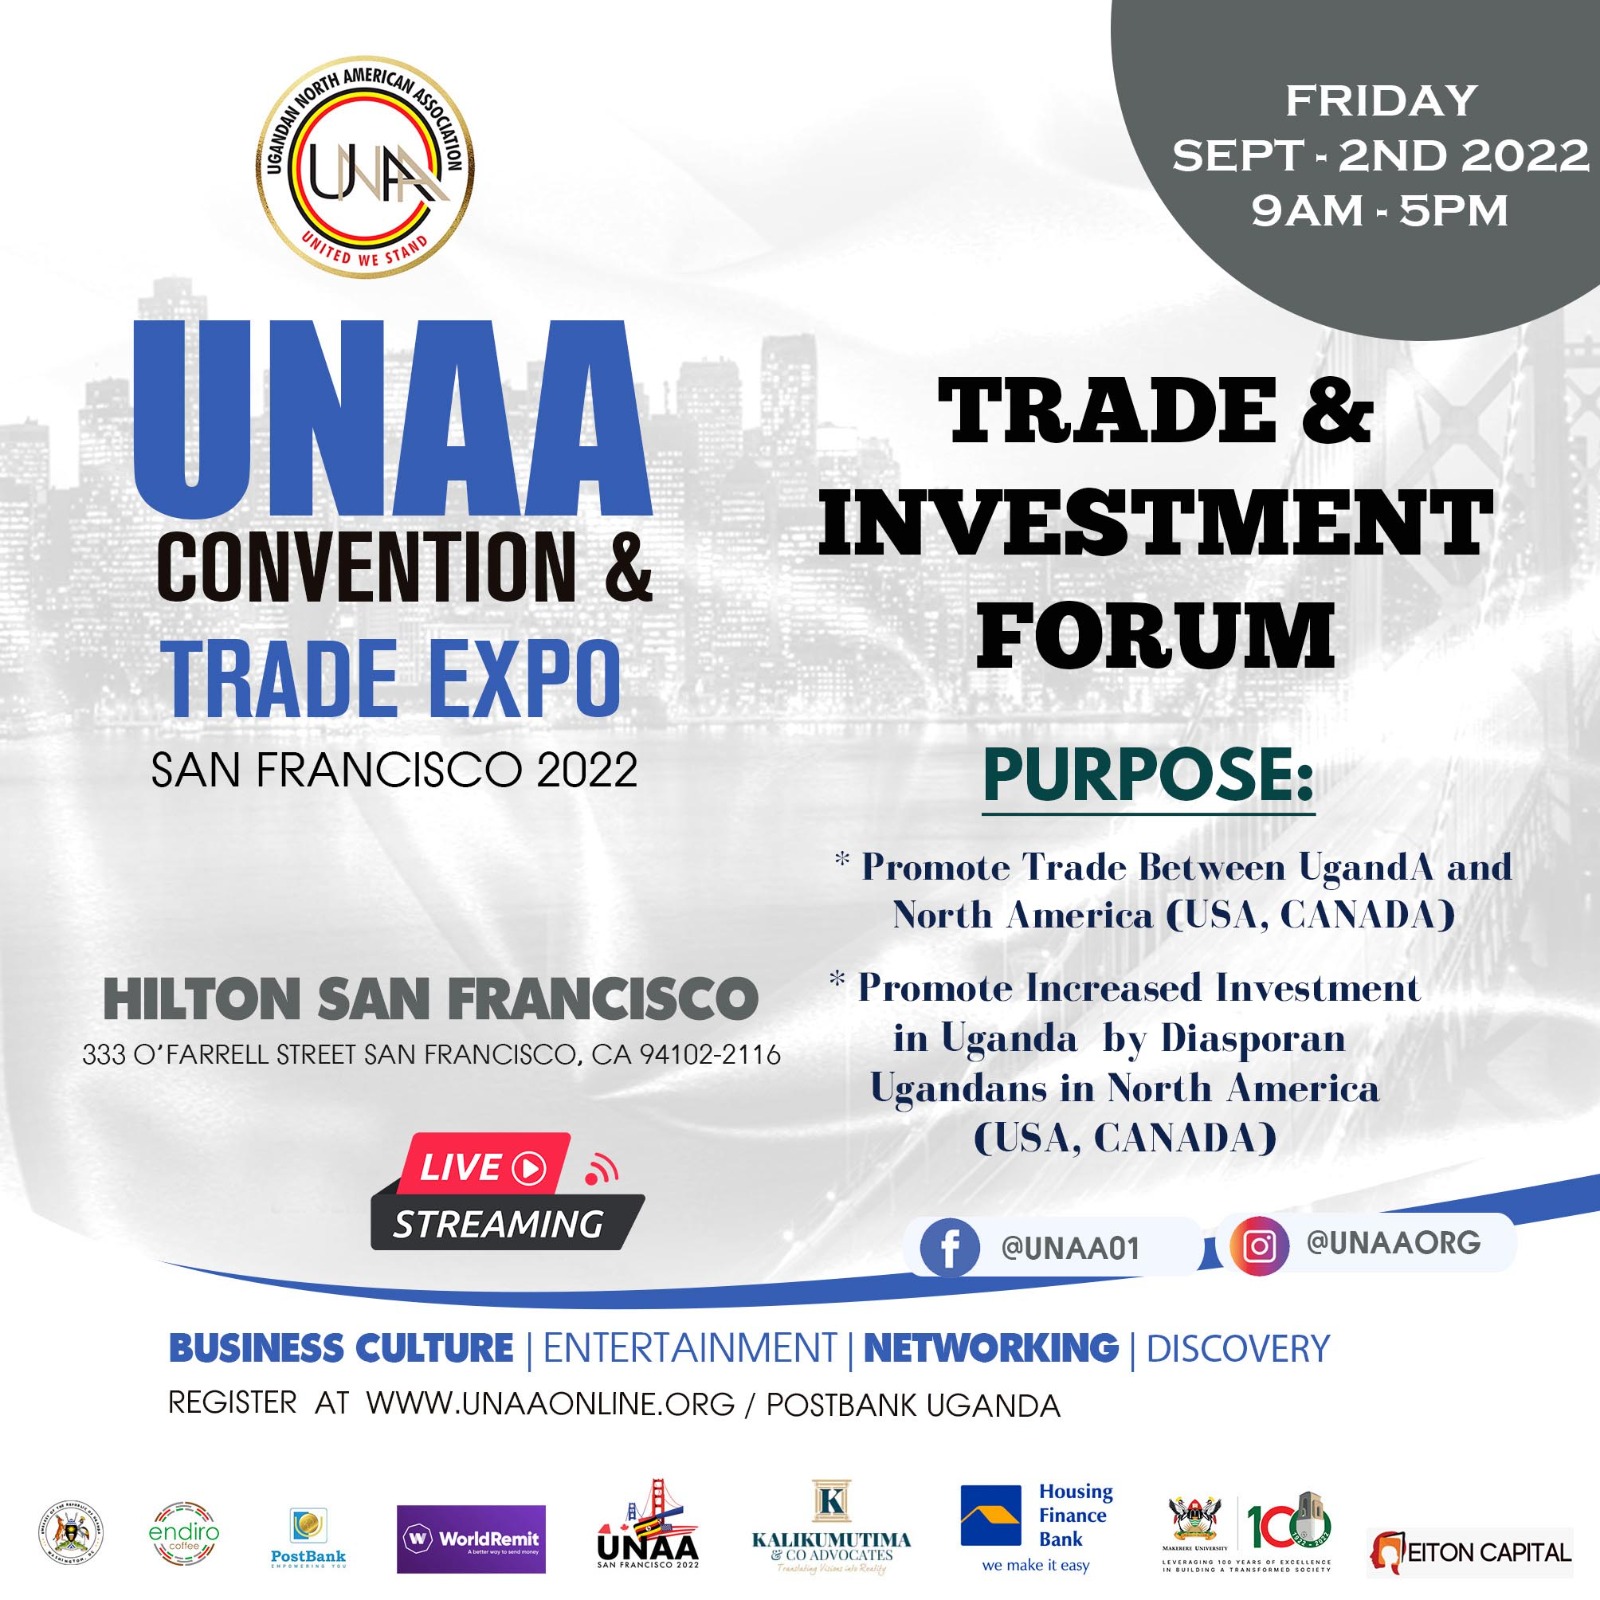 Trade & Investment Forum at the 34th UNAA Convention